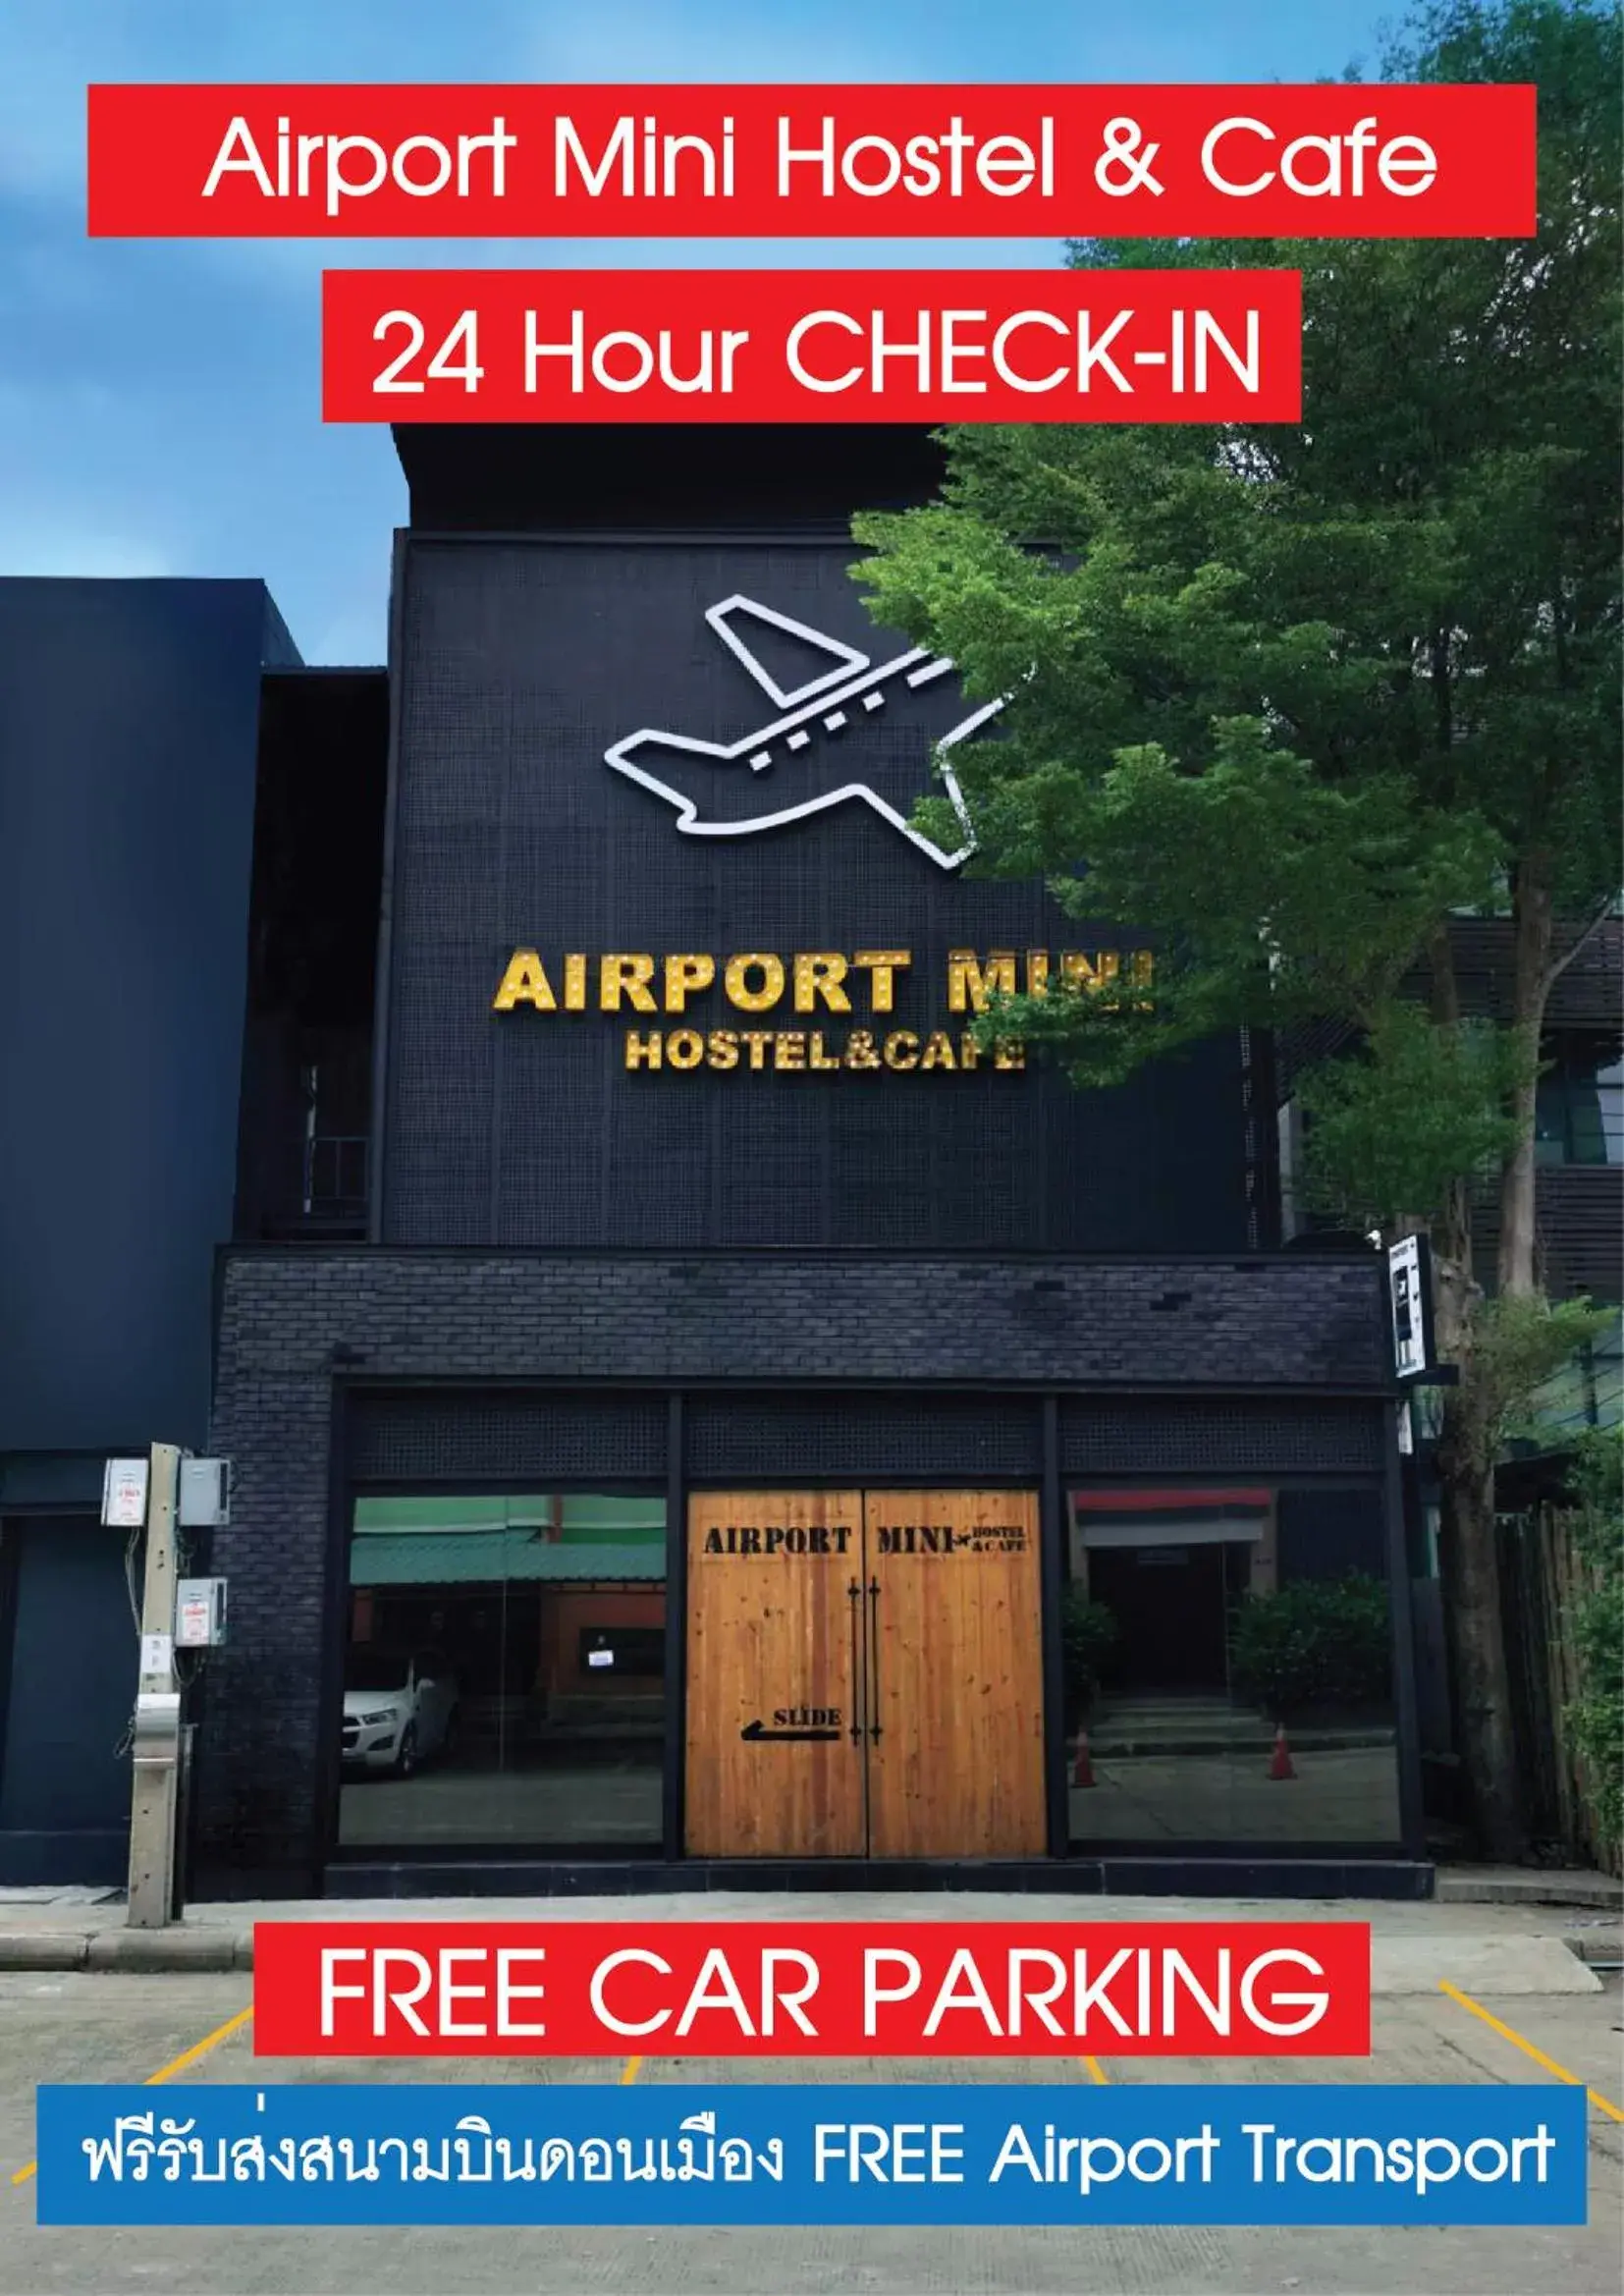 Property building in Airport Mini Hostel at Don Muang Airport